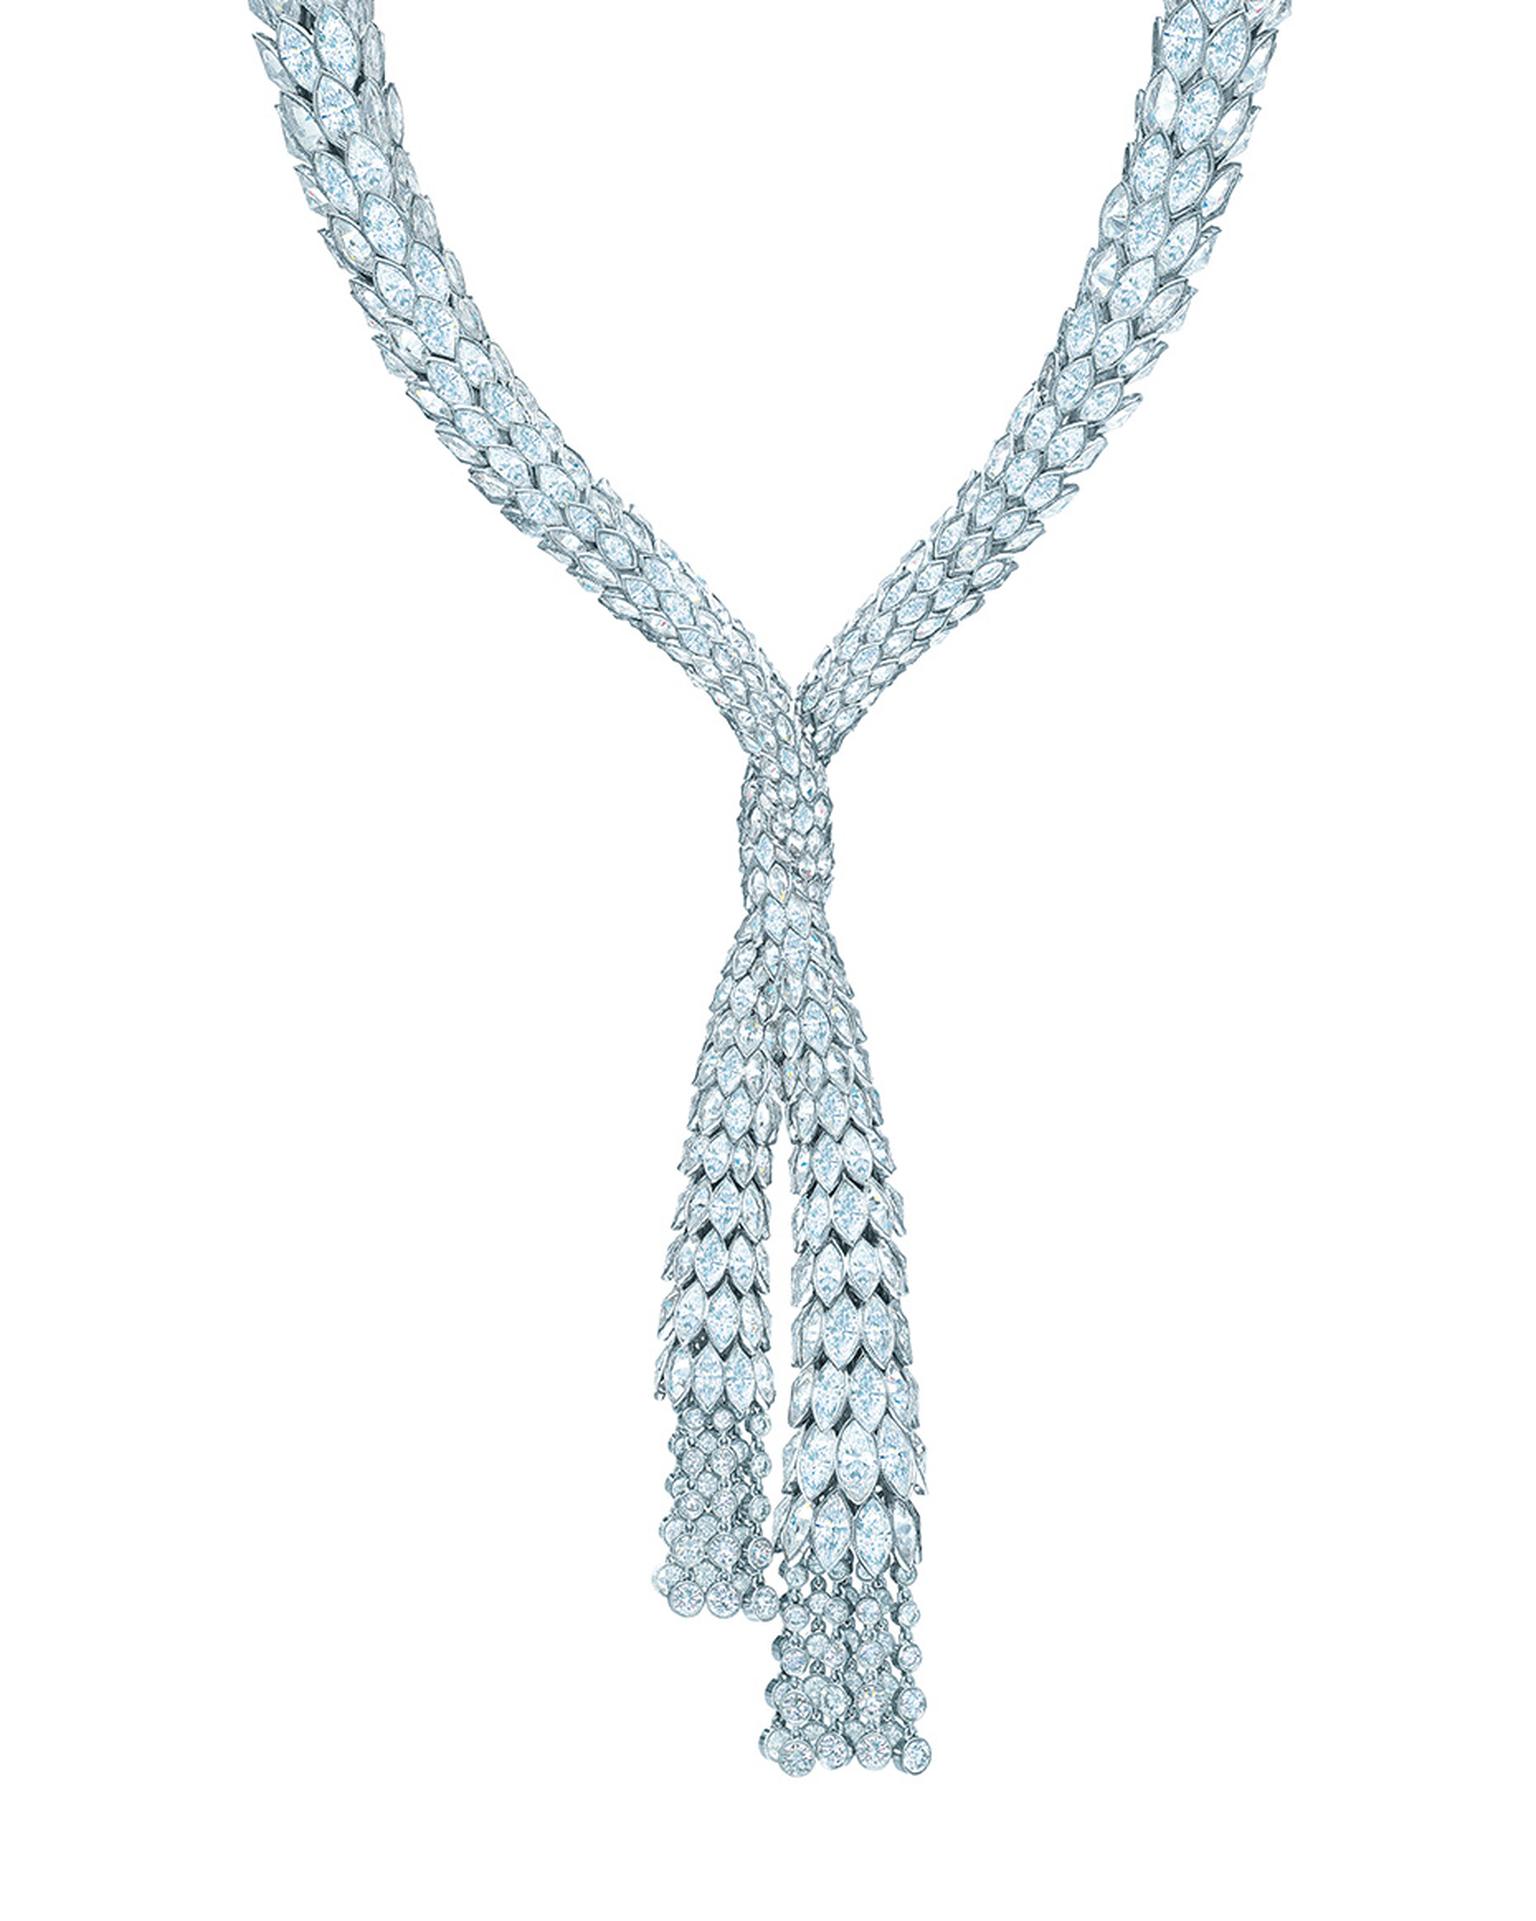 Tiffany Blue Book collection diamond drape necklace features more than 140ct of rosecut marquise and round brilliant diamonds.